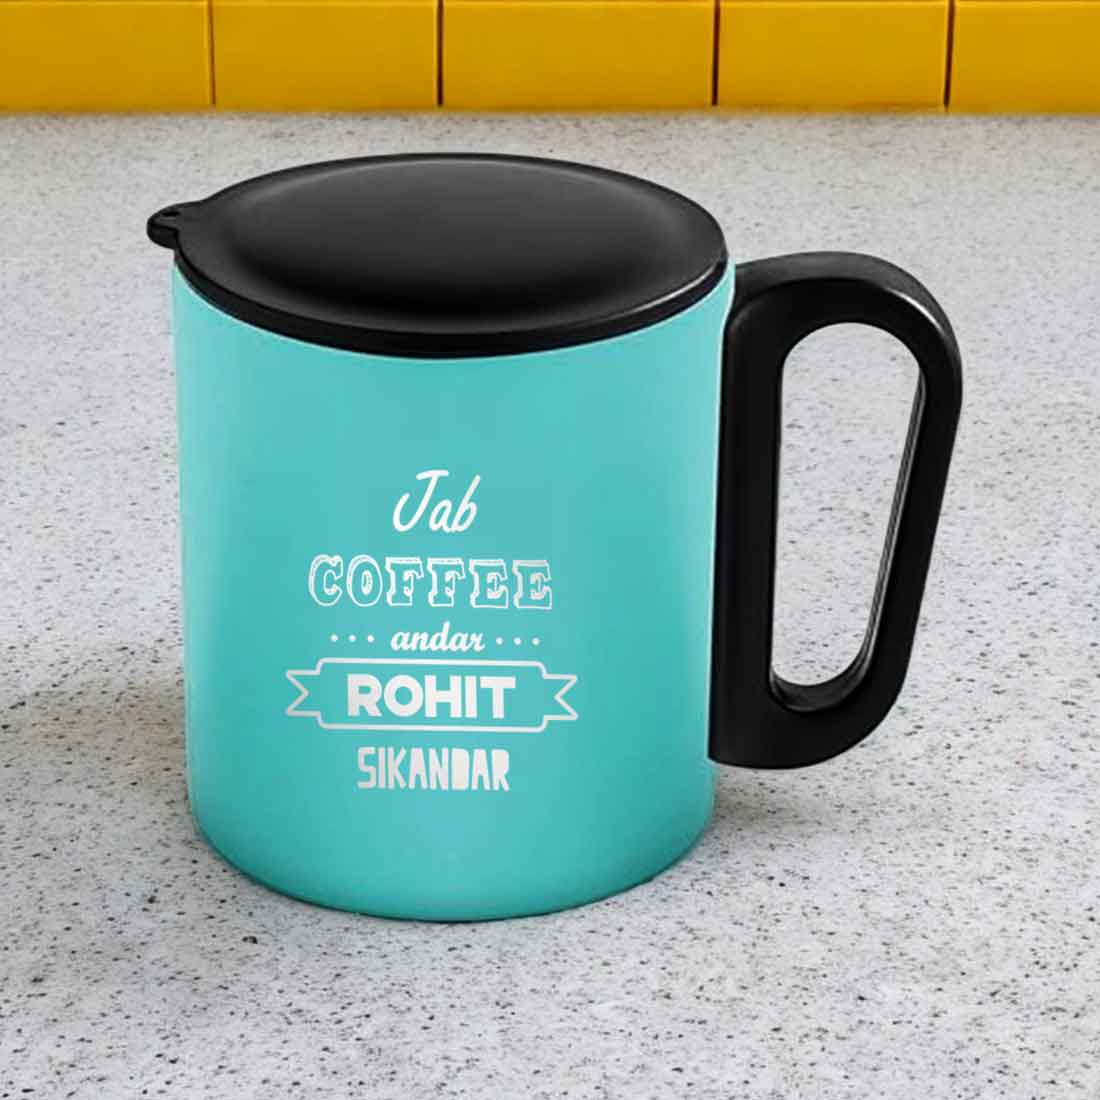 Personalized Coffee Mug with Lid - Insulated Stainless Steel Coffee Cup